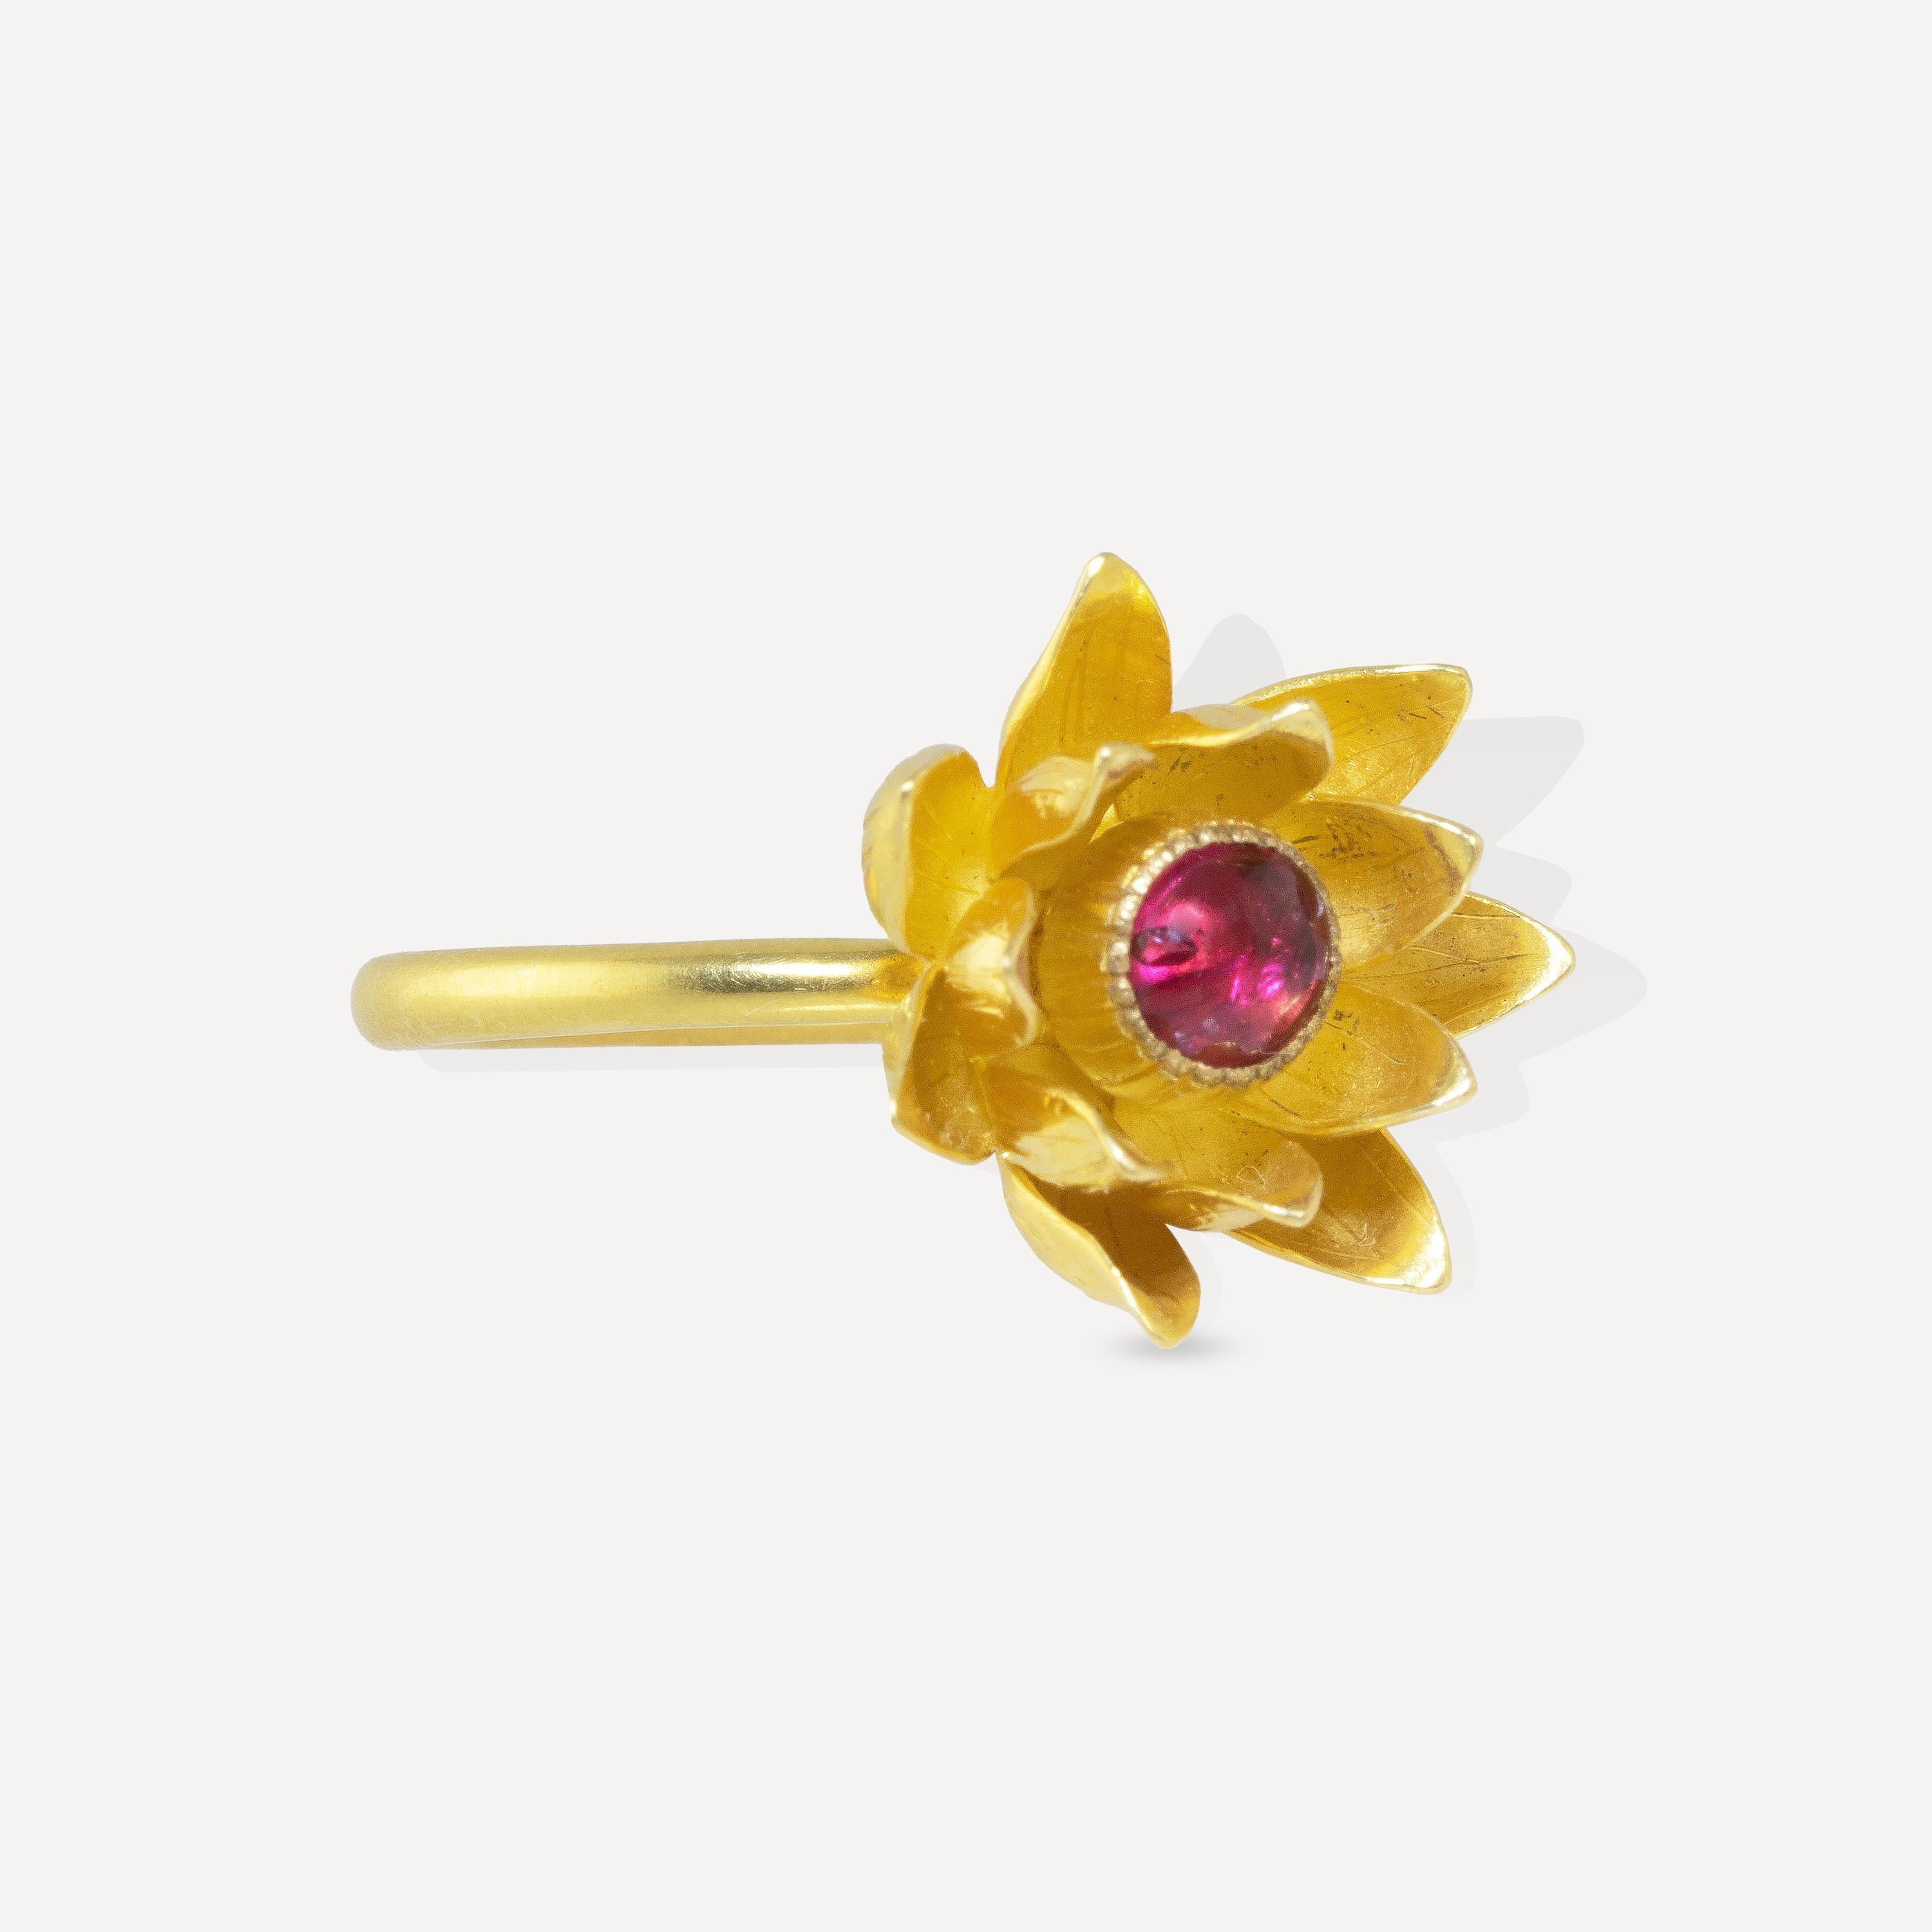 This Lotus Flower Ring features a 2 carat red spinel cabochon in the center of the lotus petals.
Made at the workshop in Myanmar by master goldsmith, Wai Lin Tun, at the workshop in Yangon, Myanmar. The petals are made in a painstaking process that